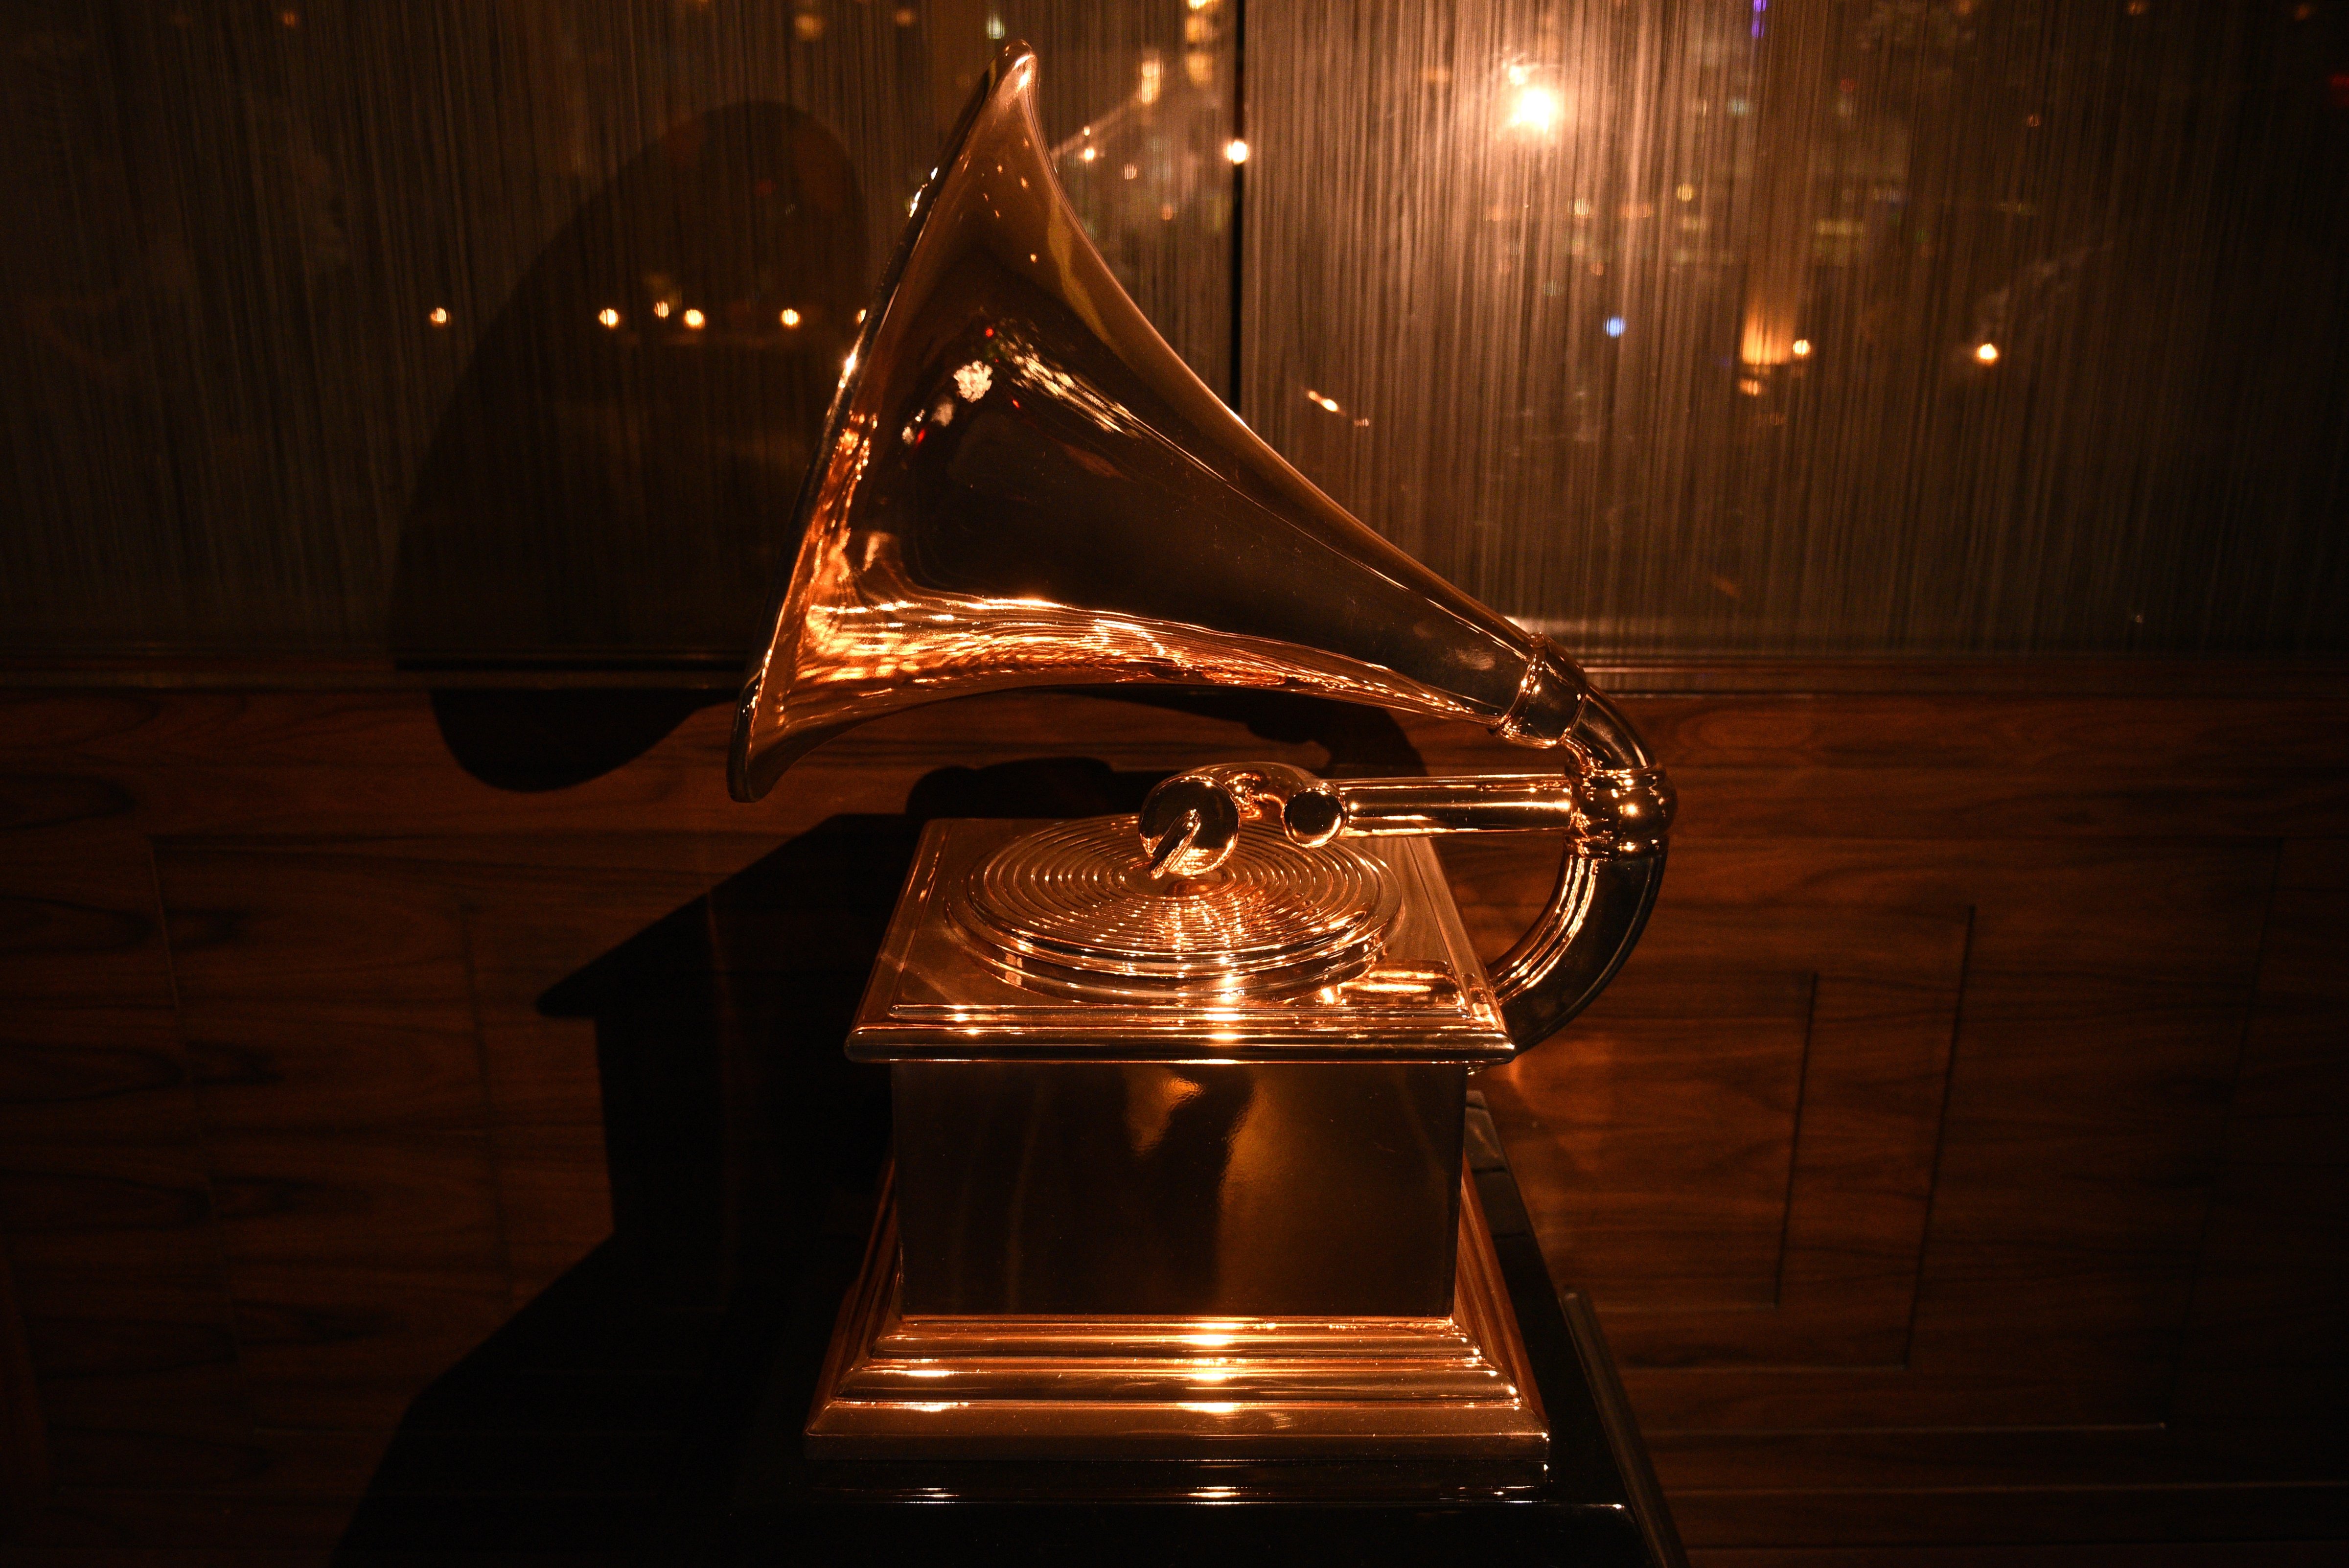 Grammy Award displayed at The Rainbow Room on January 25, 2018 in New York City (Getty Images for NARAS&mdash;2018 Getty Images)